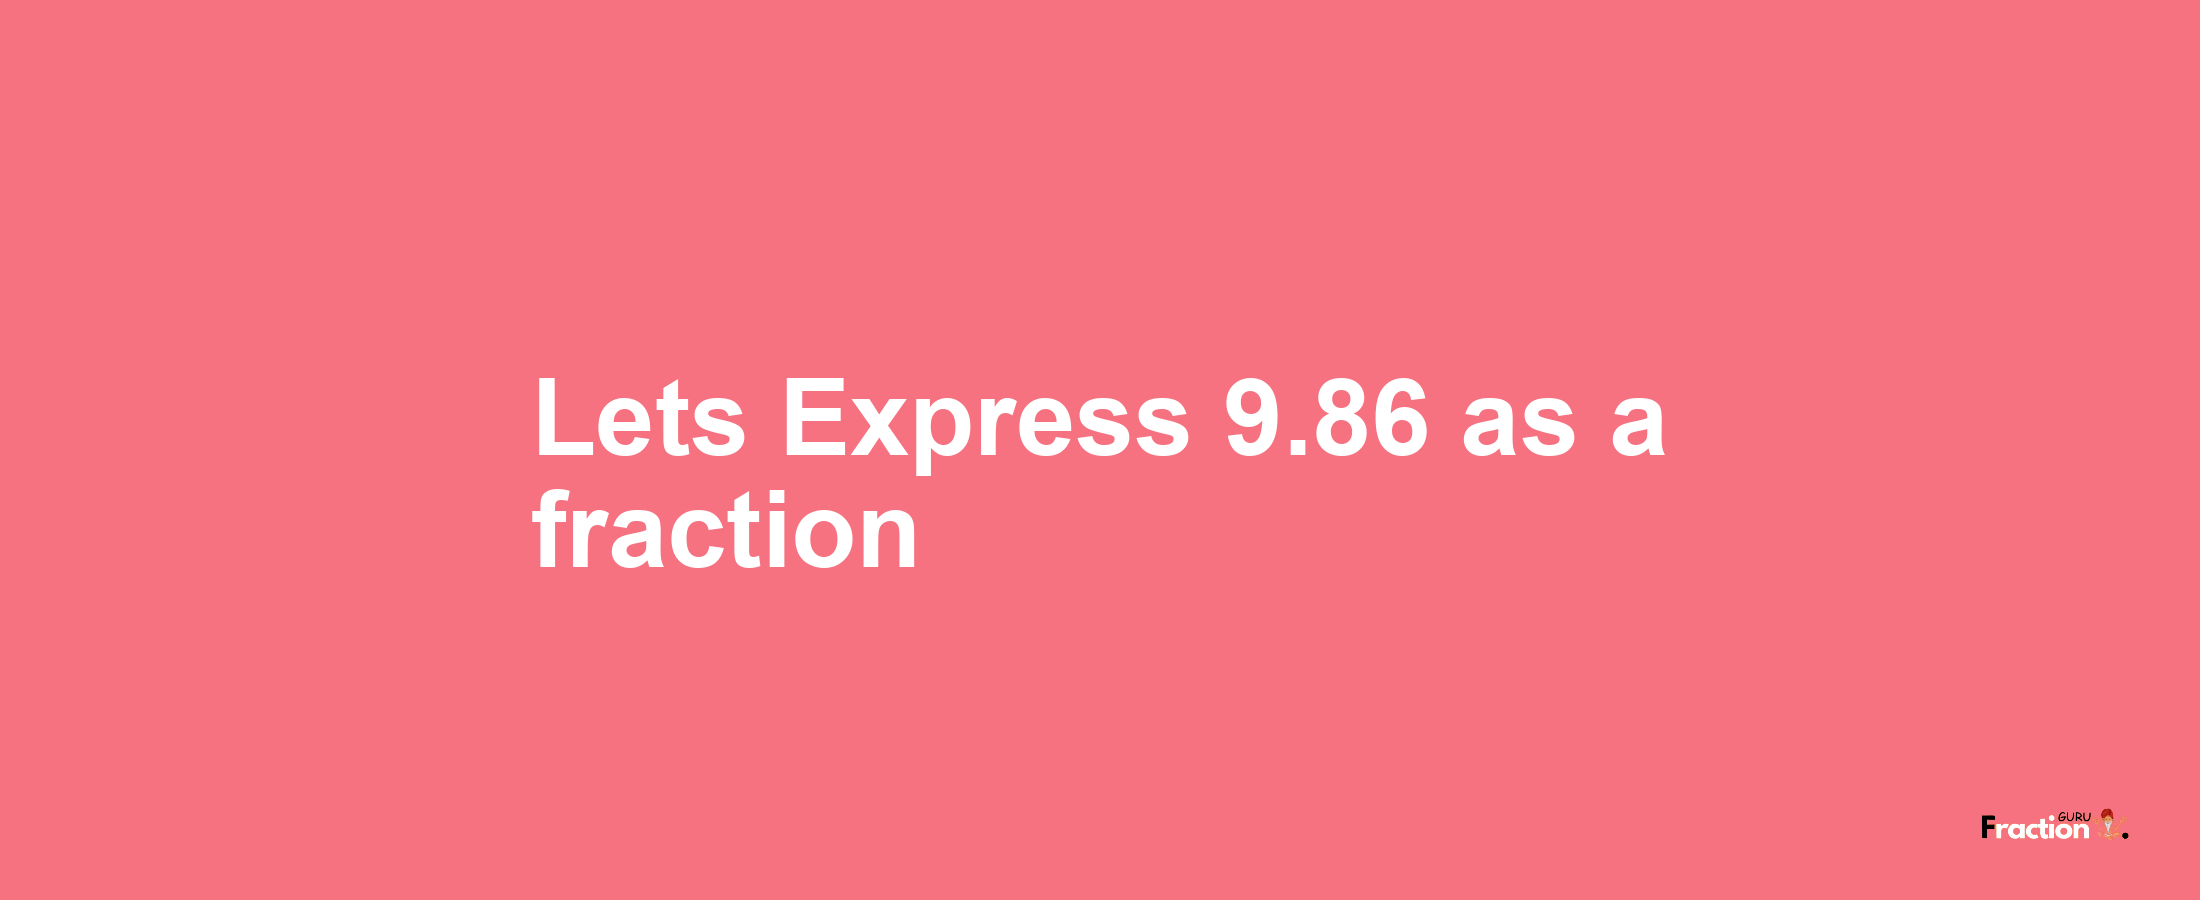 Lets Express 9.86 as afraction